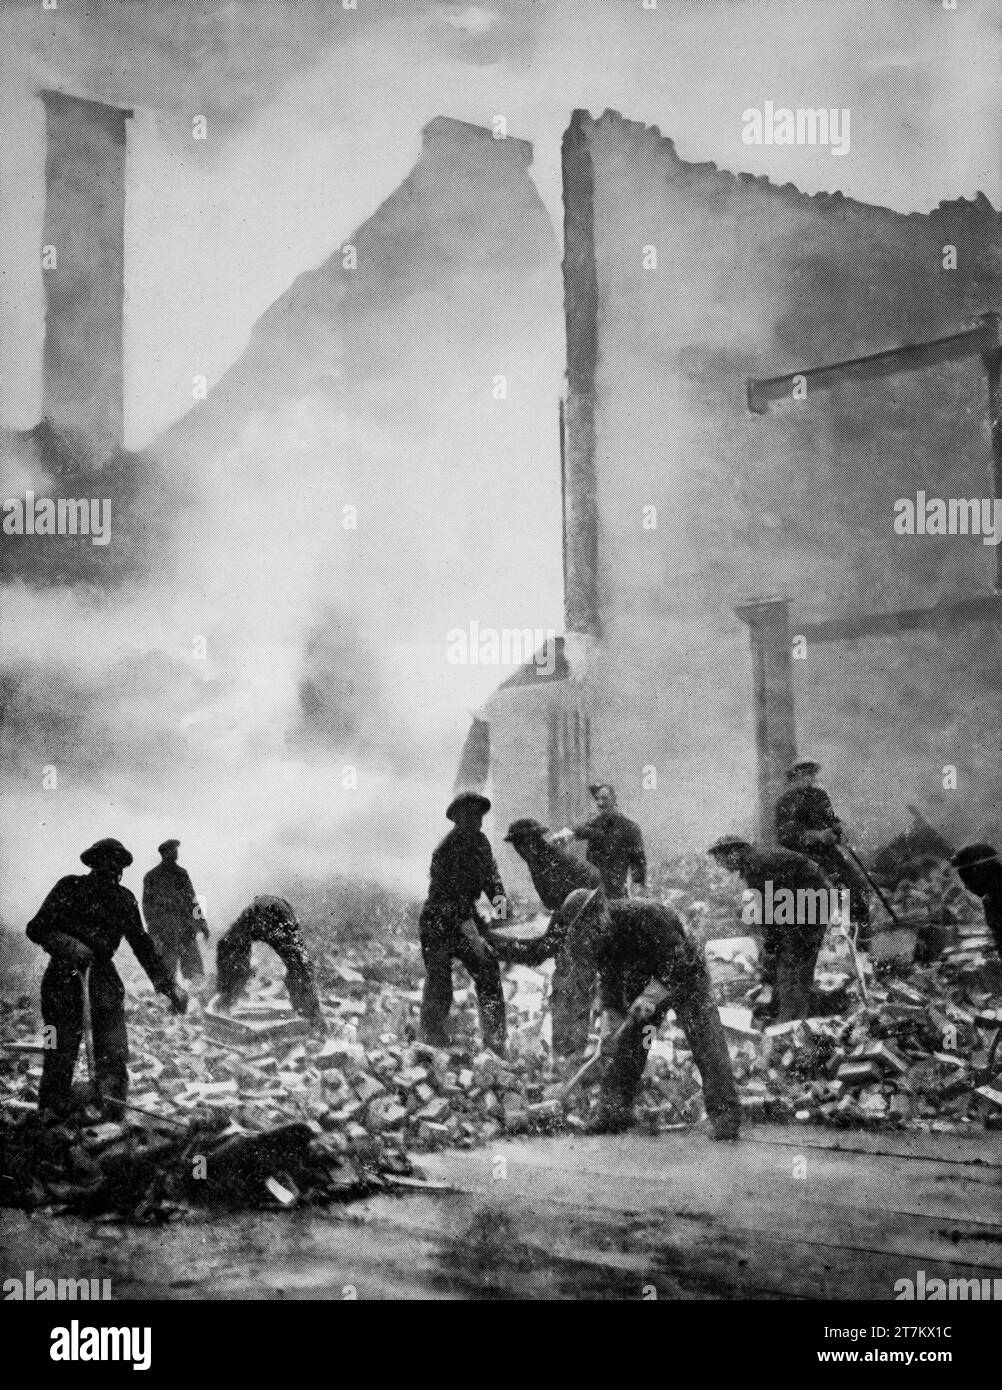 Members of the Pioneer Corps clearing rubble and damage to London streets following Luftwaffe air raids during the Second World War in January 1941. Stock Photo